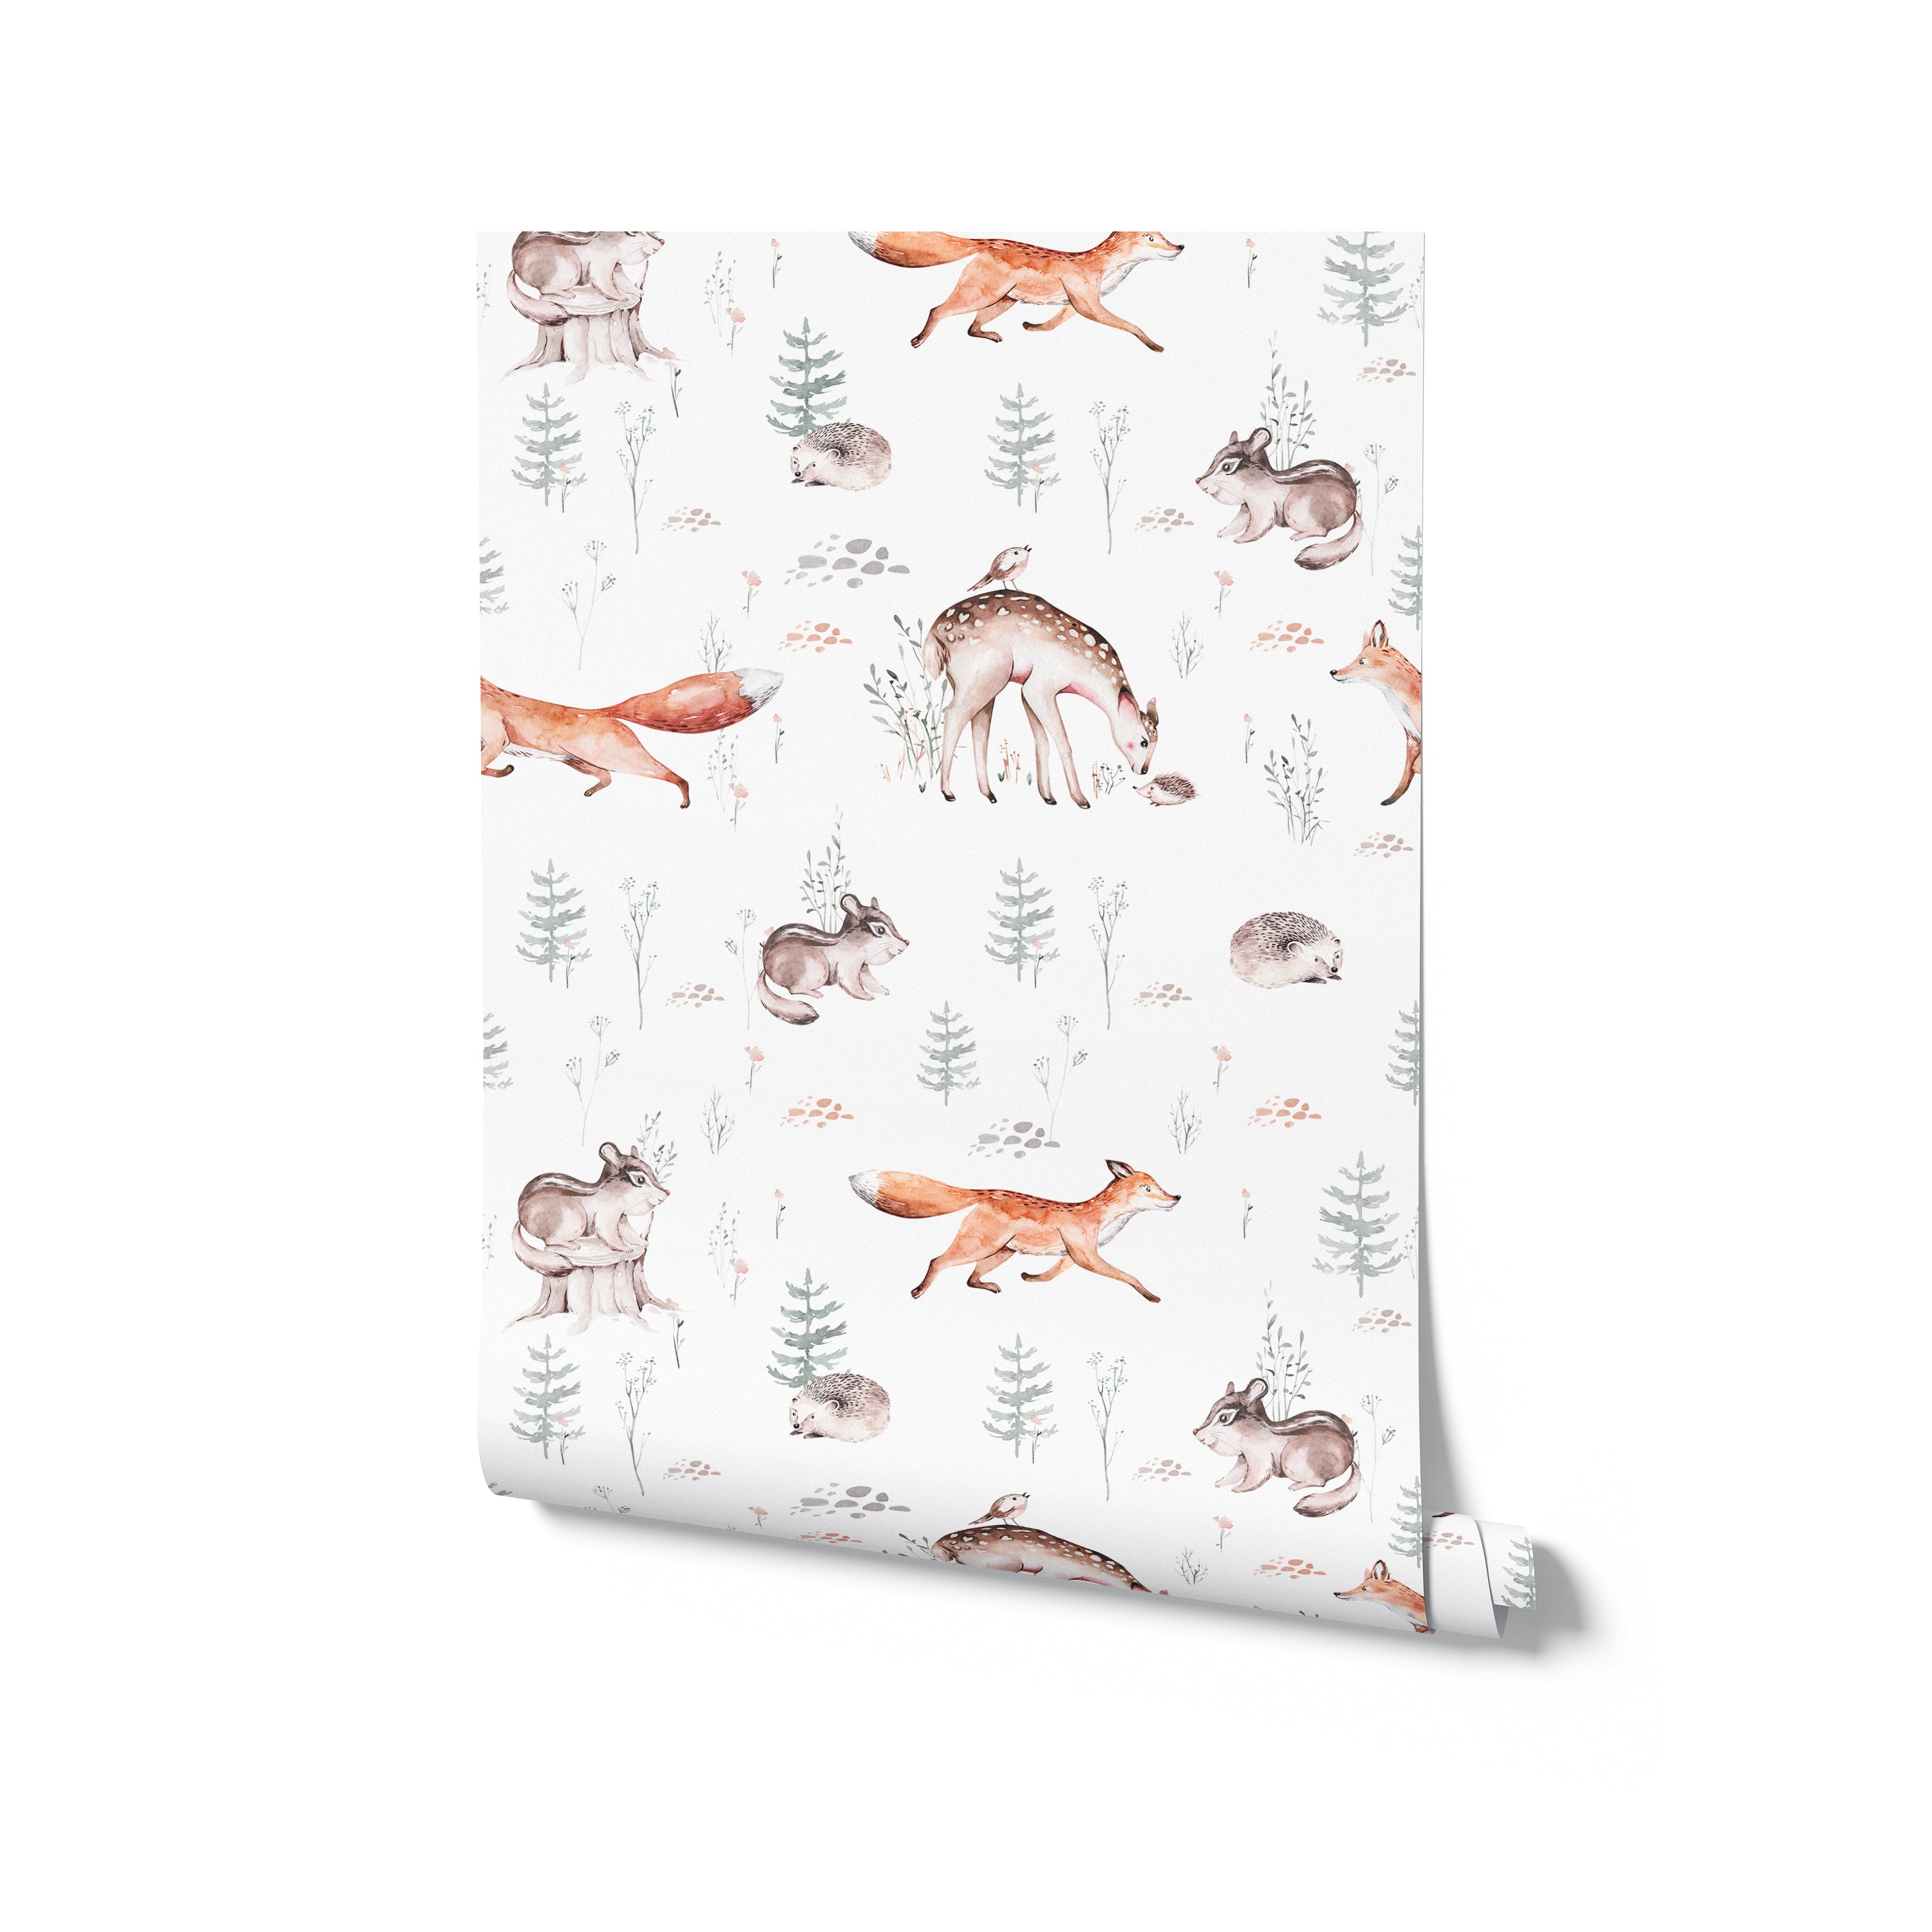 A roll of Woodland Wonder Wallpaper displayed against a plain background, highlighting its pattern of adorable woodland animals and flora in soft watercolor hues, perfect for adding a magical touch to any child’s room or nursery.